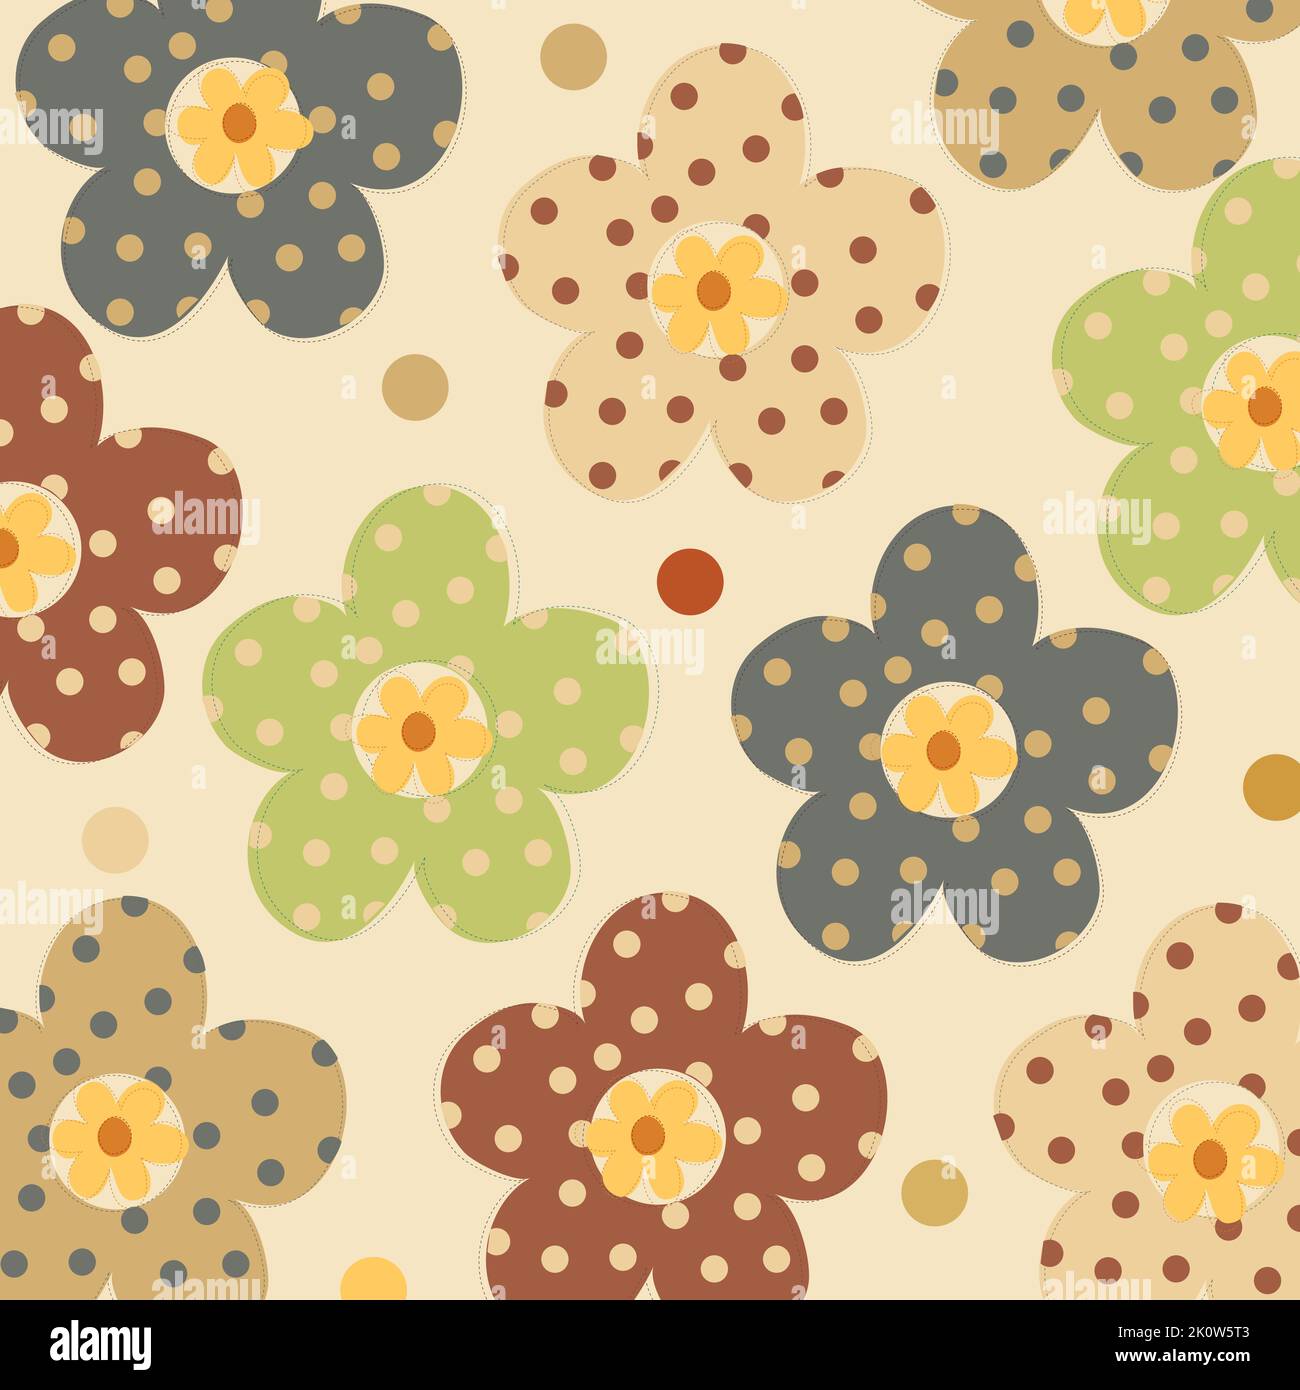 Polka Dot Groovy Retro Flowers Vector Pattern. Organic Abstract Daisy And Camomile Flower Vintage Elements Pattern. 70s, 80s, 90s Styled Polka Dot Stock Vector